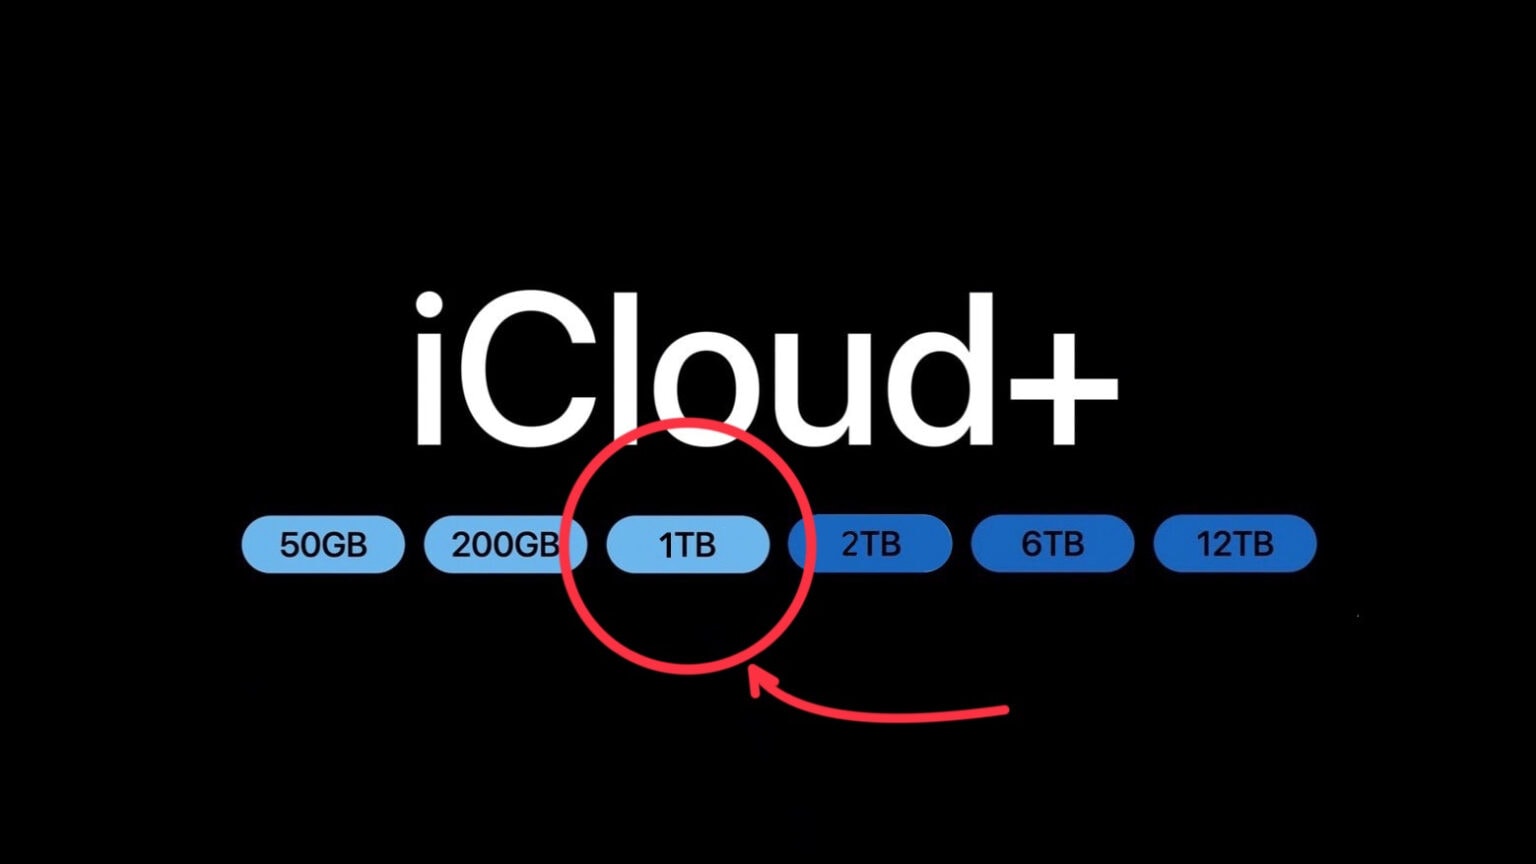 1TB iCloud storage plan would be a win for both Apple and users